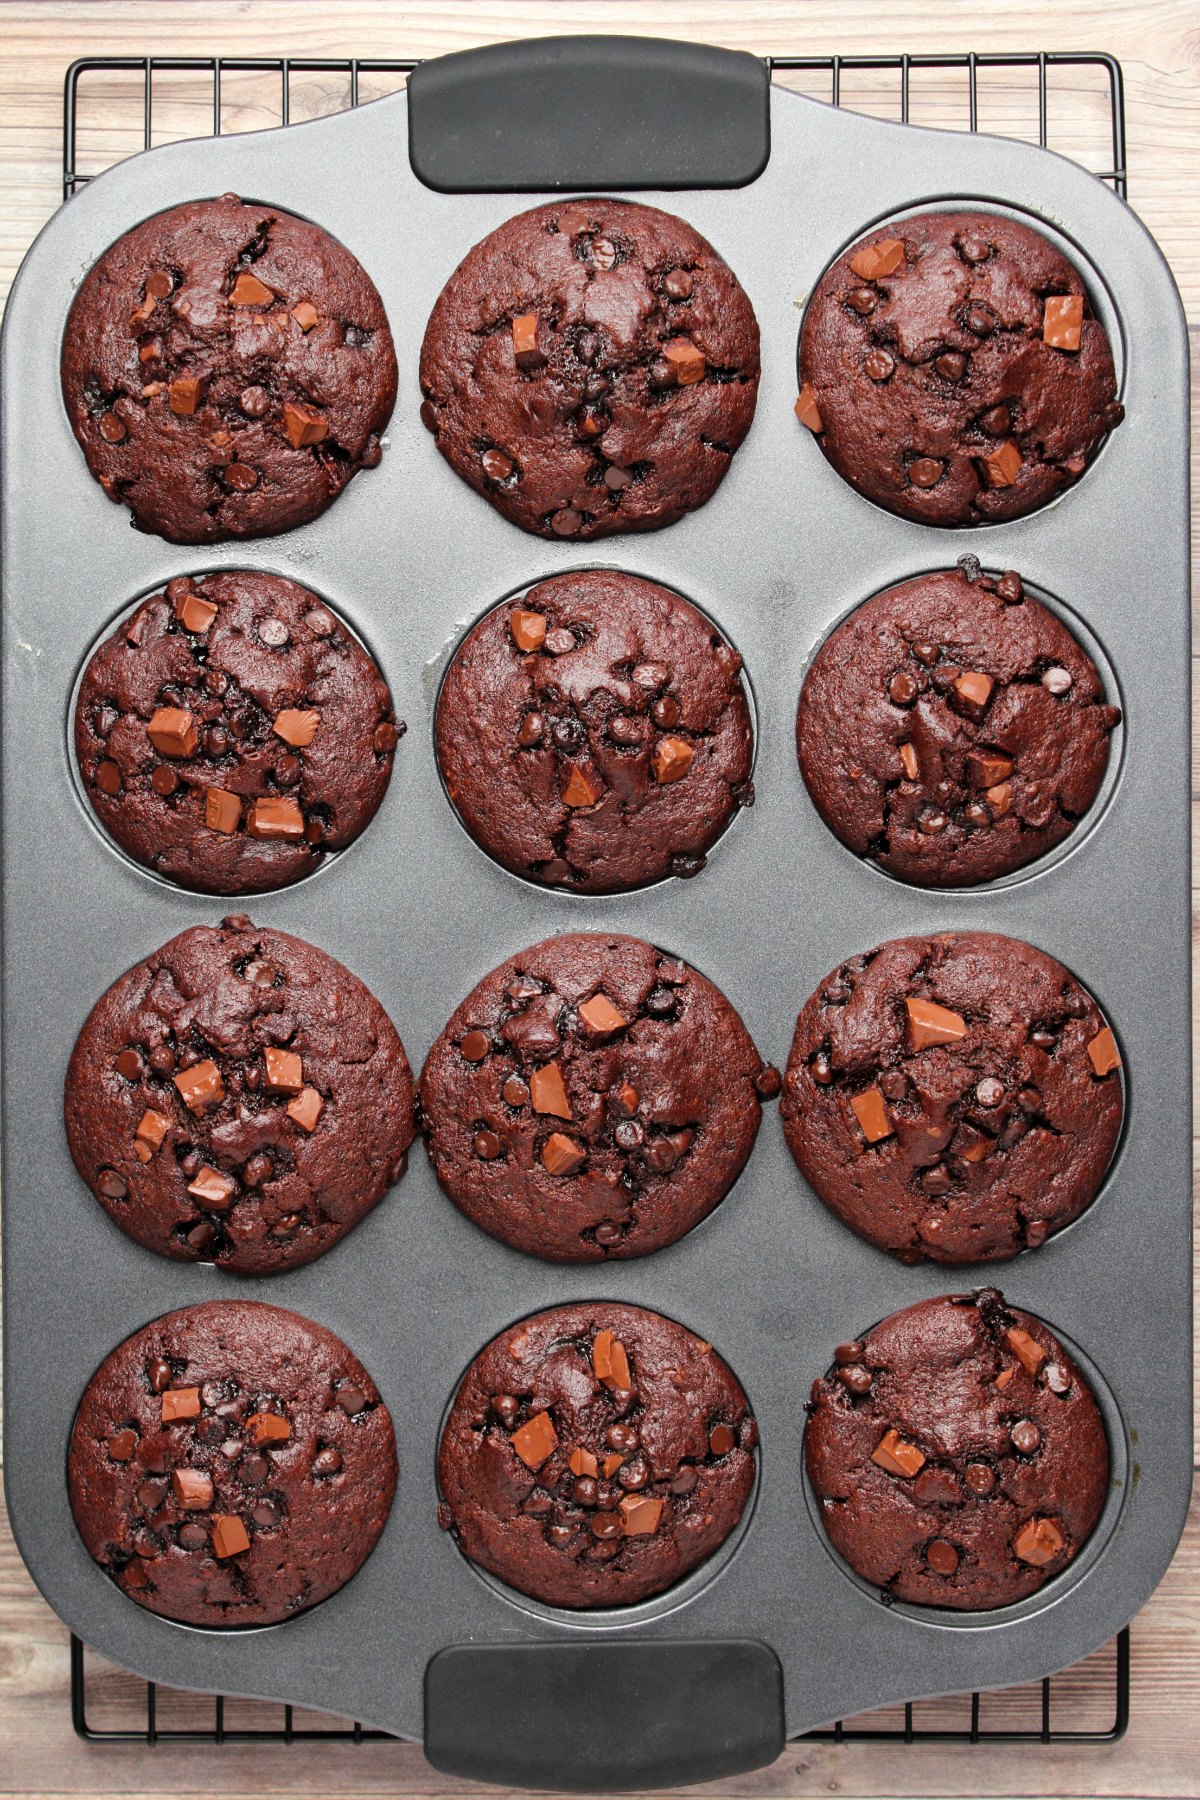 Baked chocolate muffins in a muffin tray.